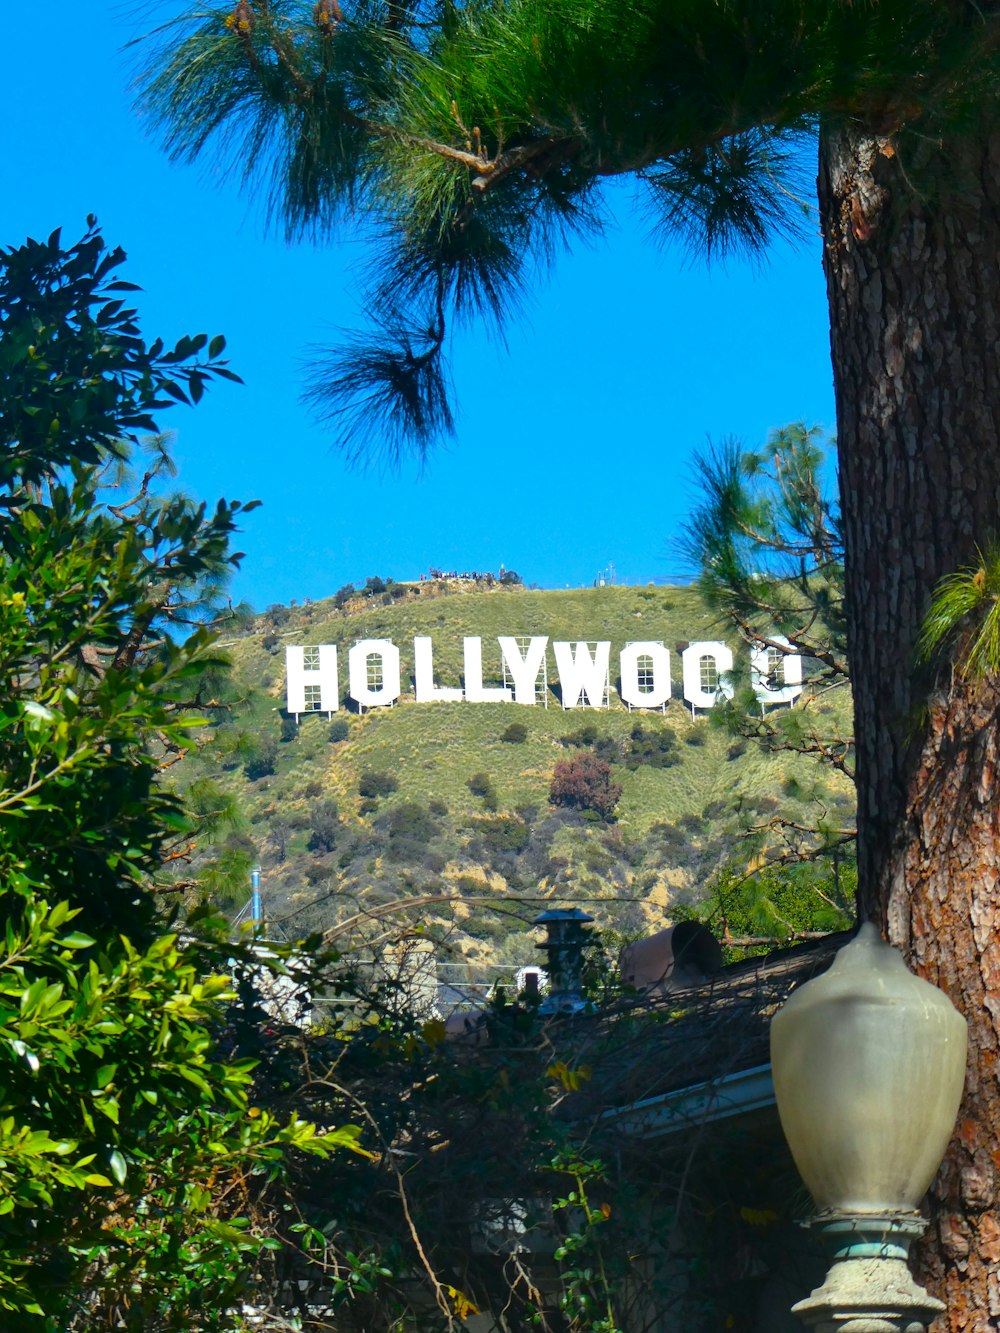 the hollywood sign is visible through the trees